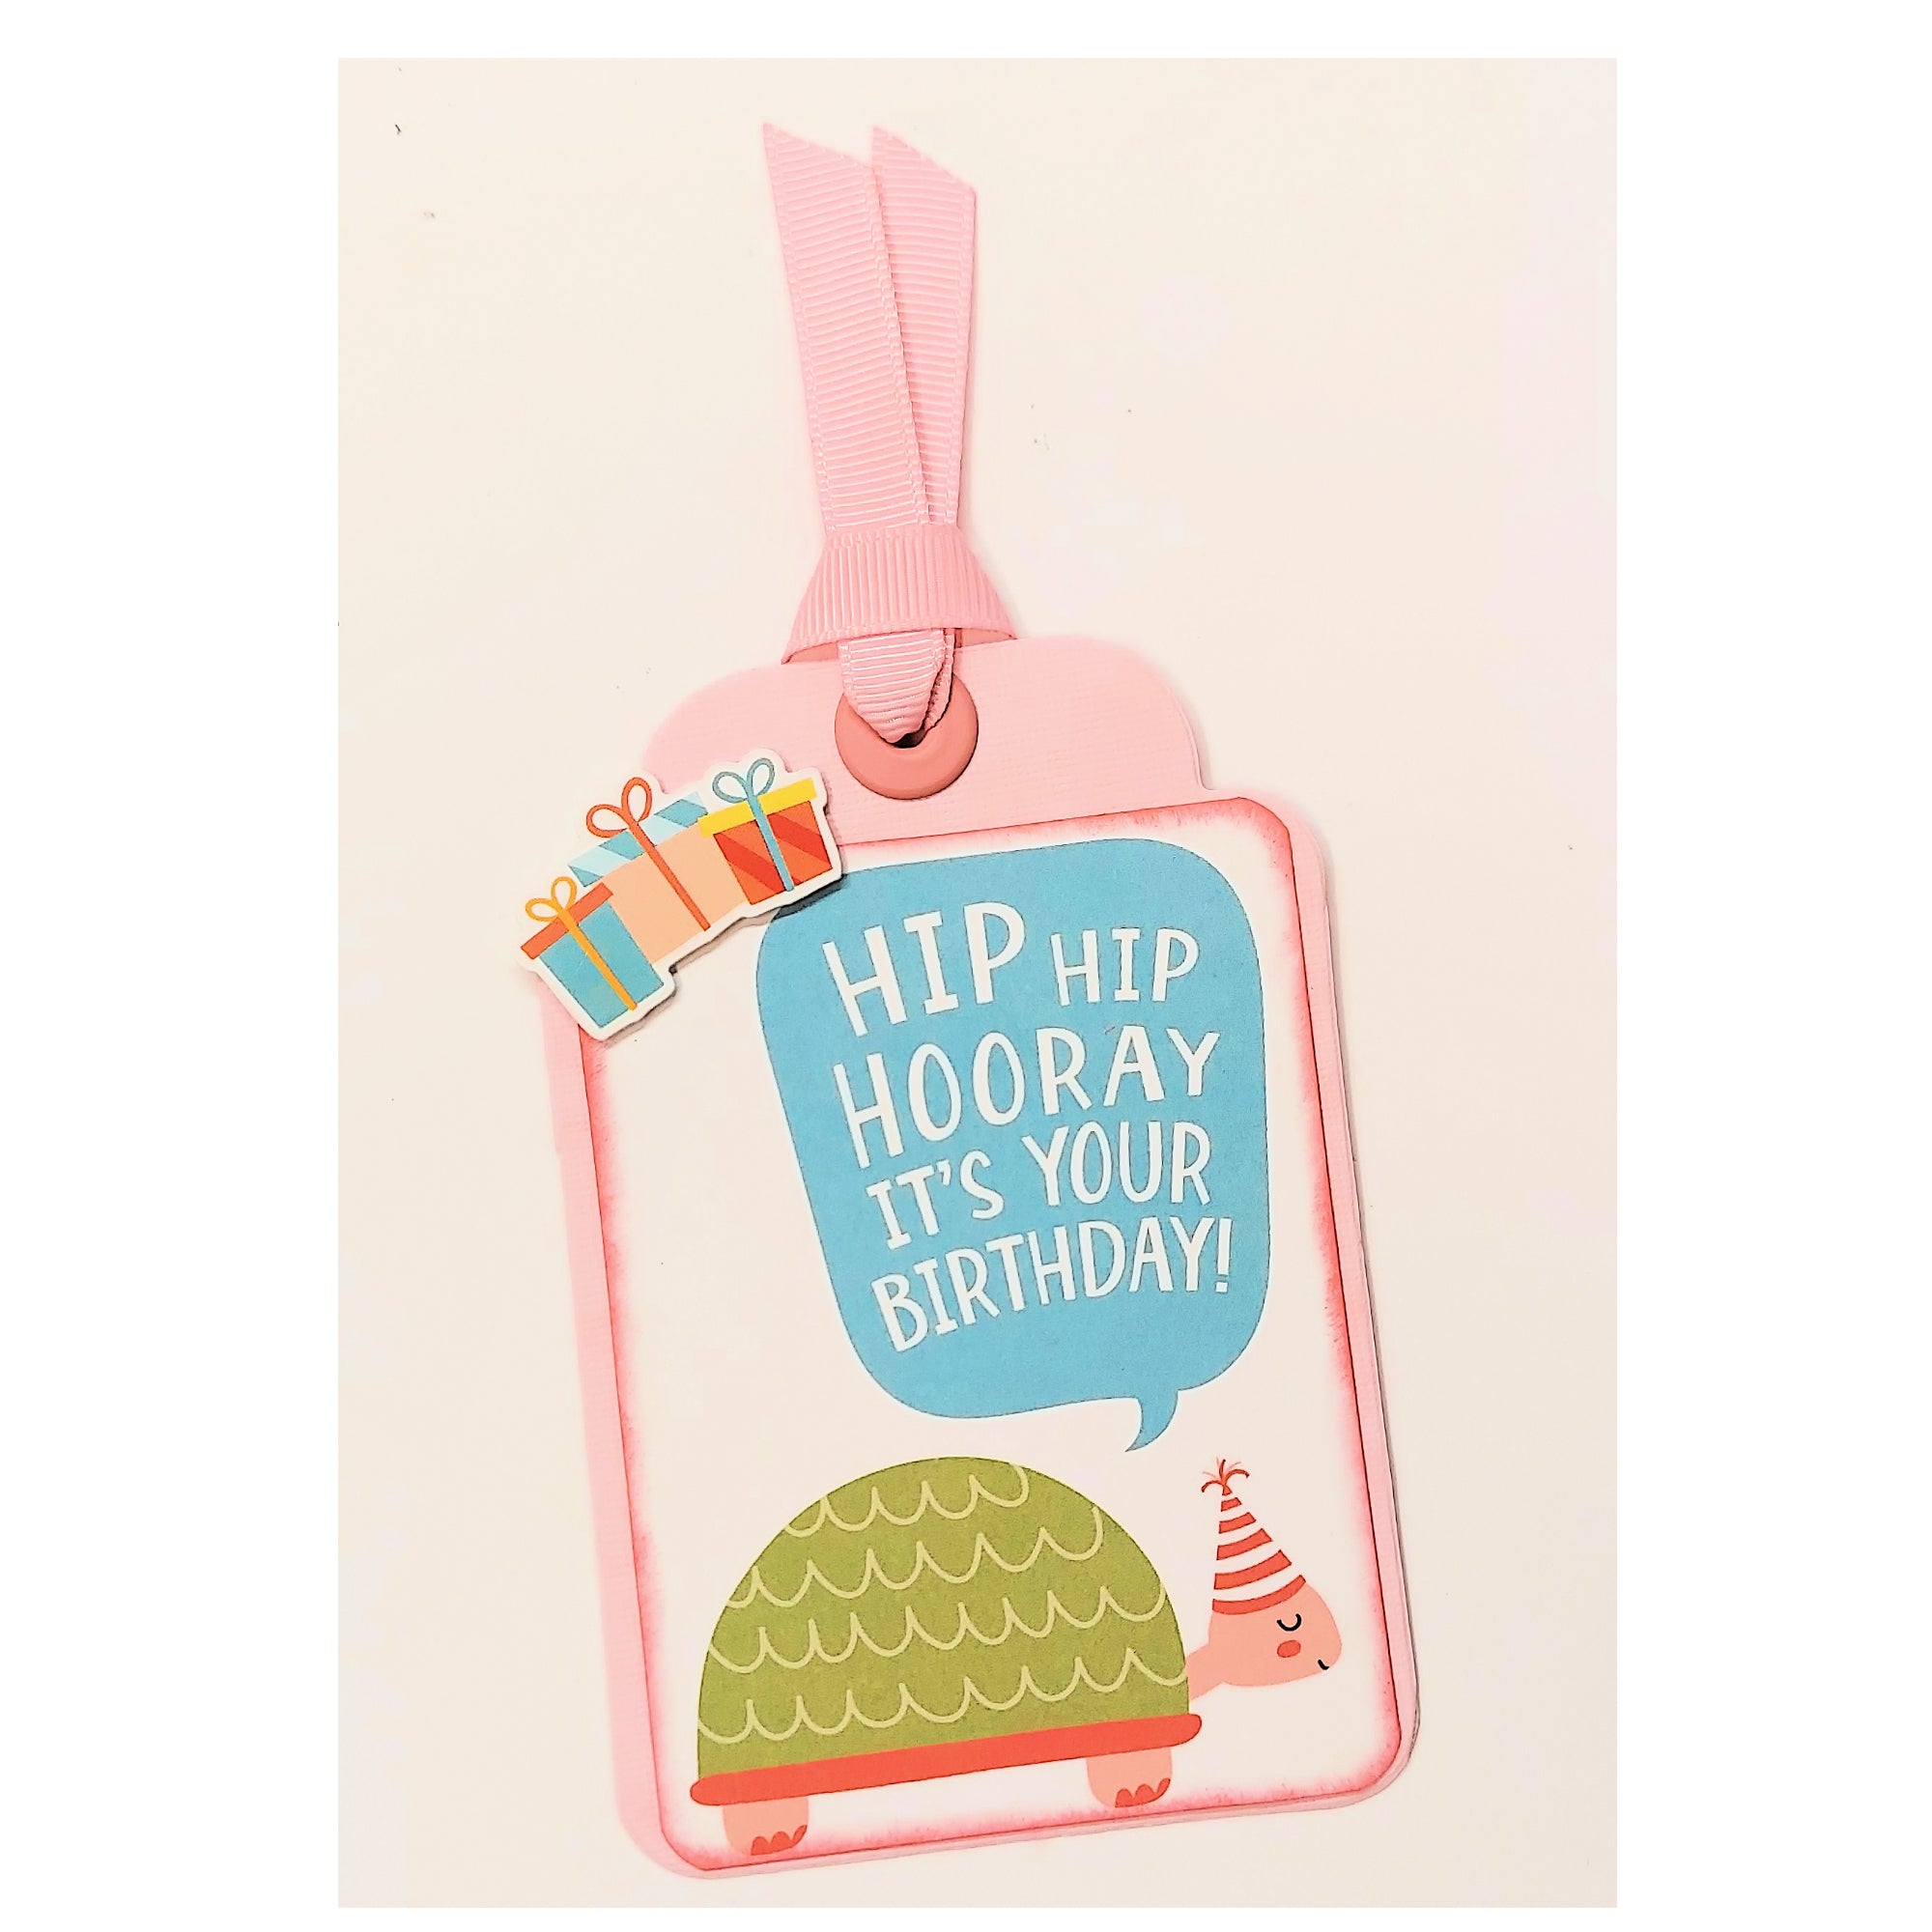 Hip Hip Hooray It's Your Birthday Turtle Tag 3 x 5 Coordinating Scrapbook Tag Embellishment by SSC Designs